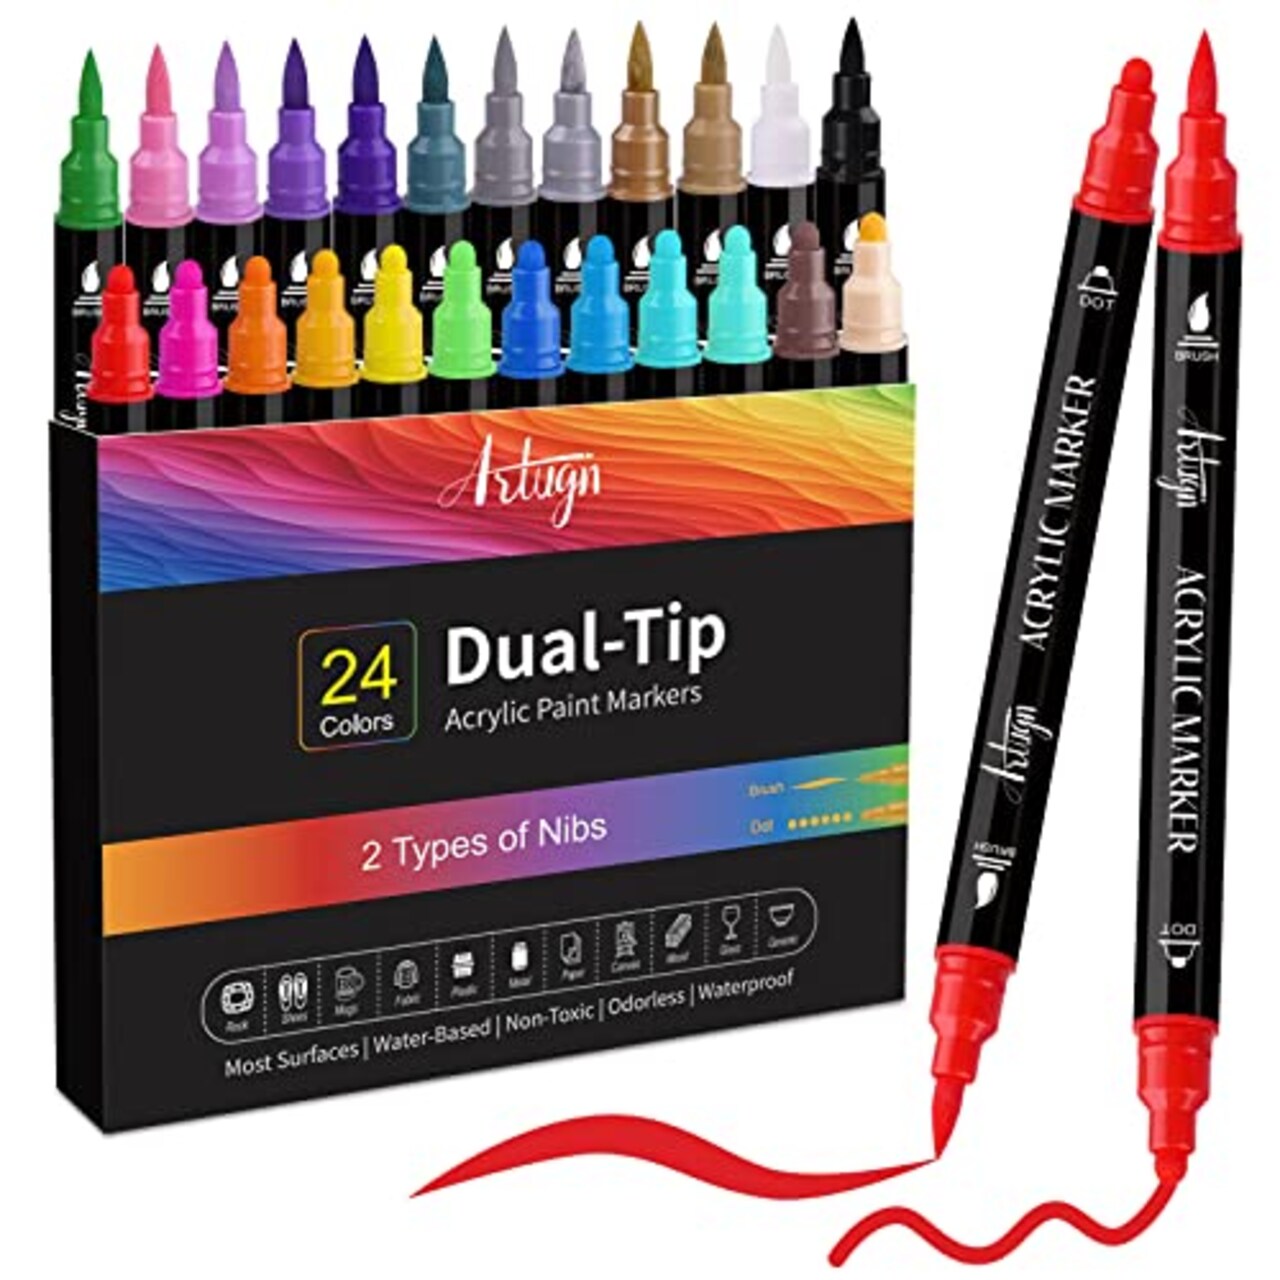 24 Colors Acrylic Paint Pens, Dual Tip Pens With Medium Tip and